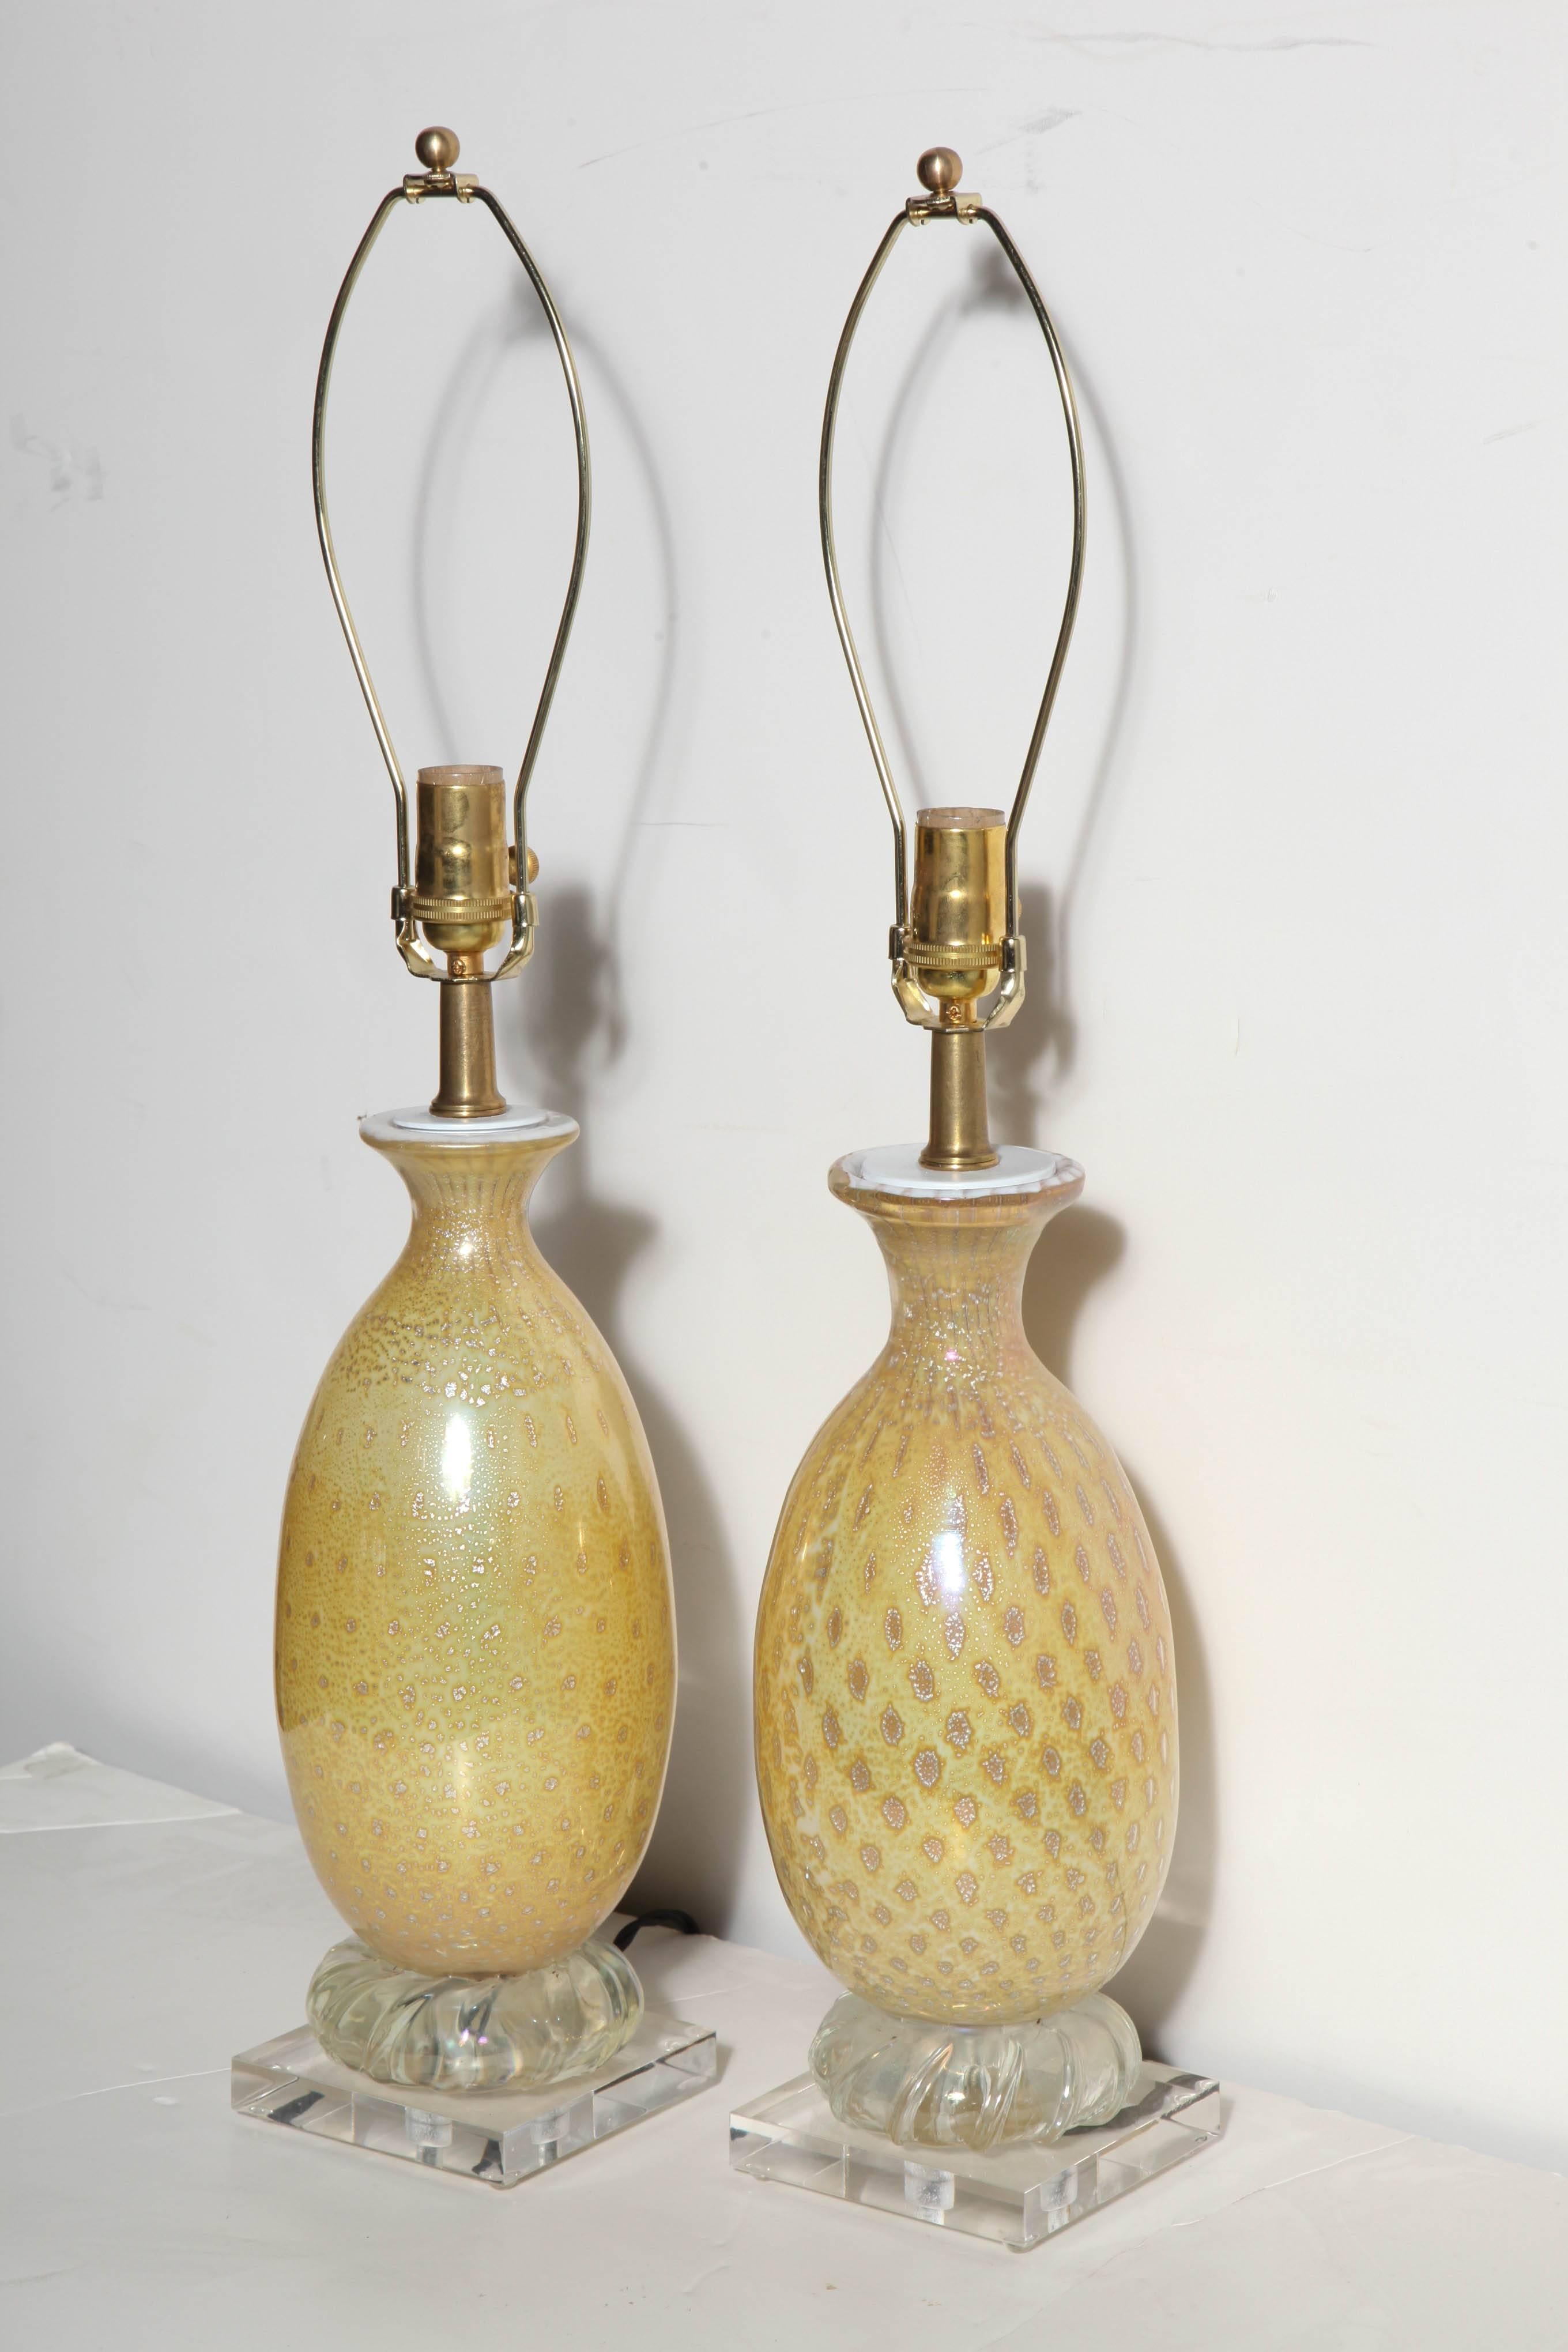 Two Barovier and Toso Yellow Amber & White Murano Glass Table Lamps. Featuring hand blown bottle forms in White, Yellow with Silver rims and Gold inclusions. Brass neck. White cap. With round swirled clear glass detail above Modern 5H square Lucite